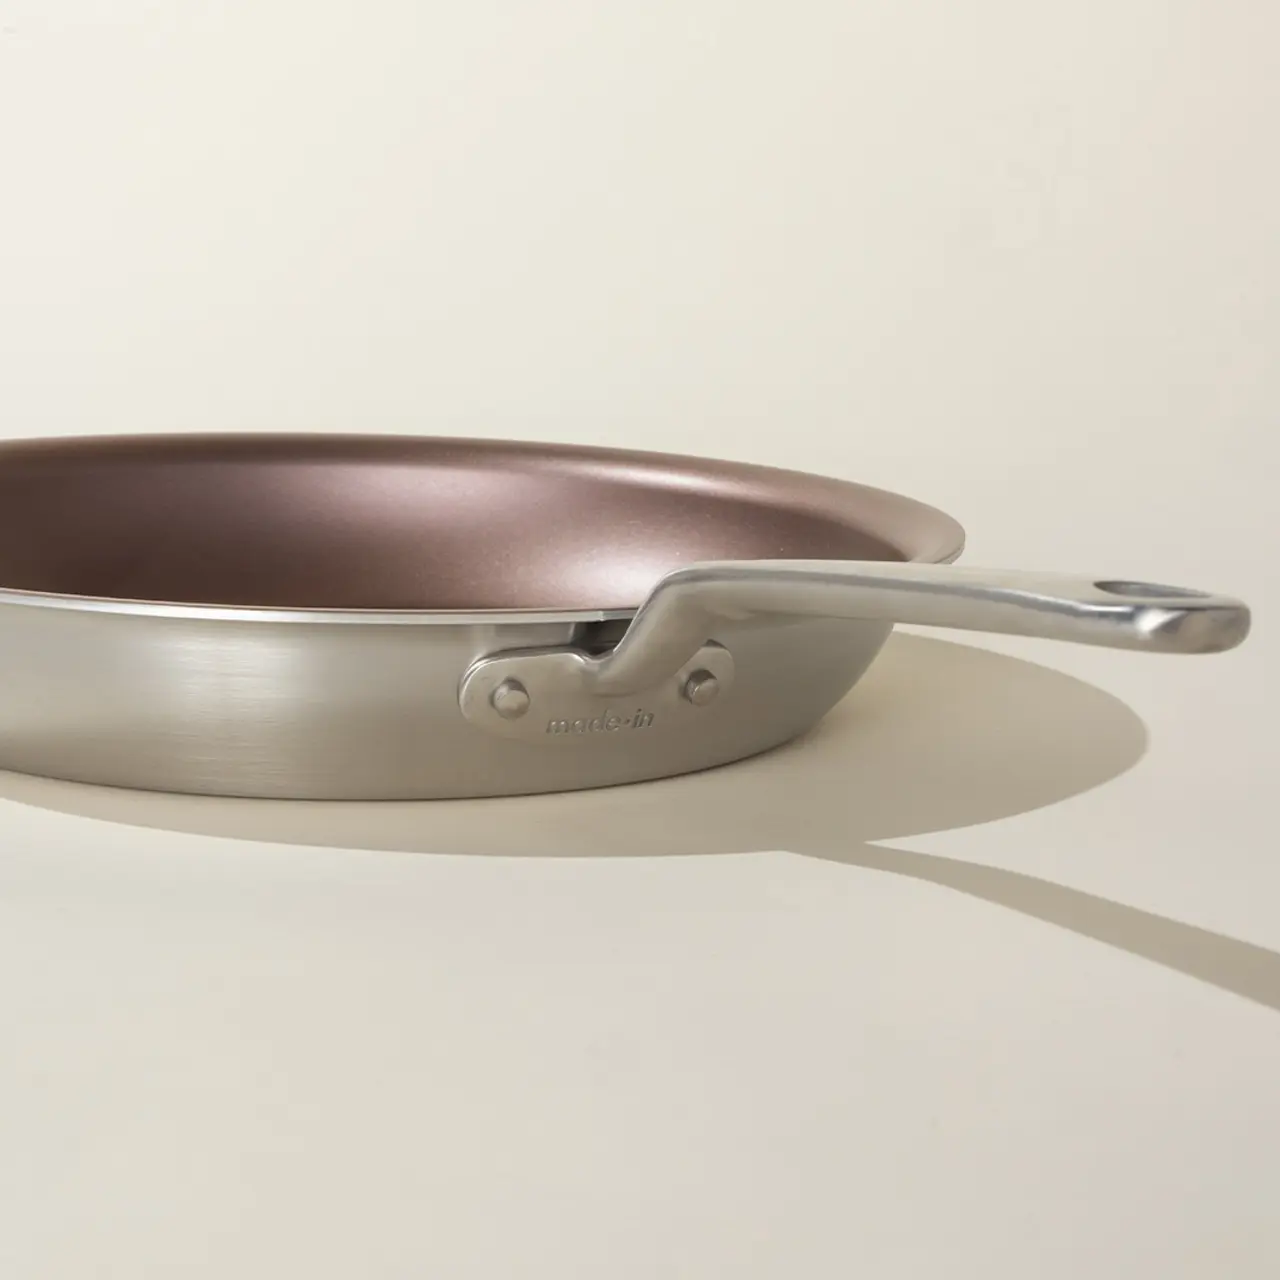 A stainless steel frying pan with a bronze-toned interior rests on a light surface casting a soft shadow.